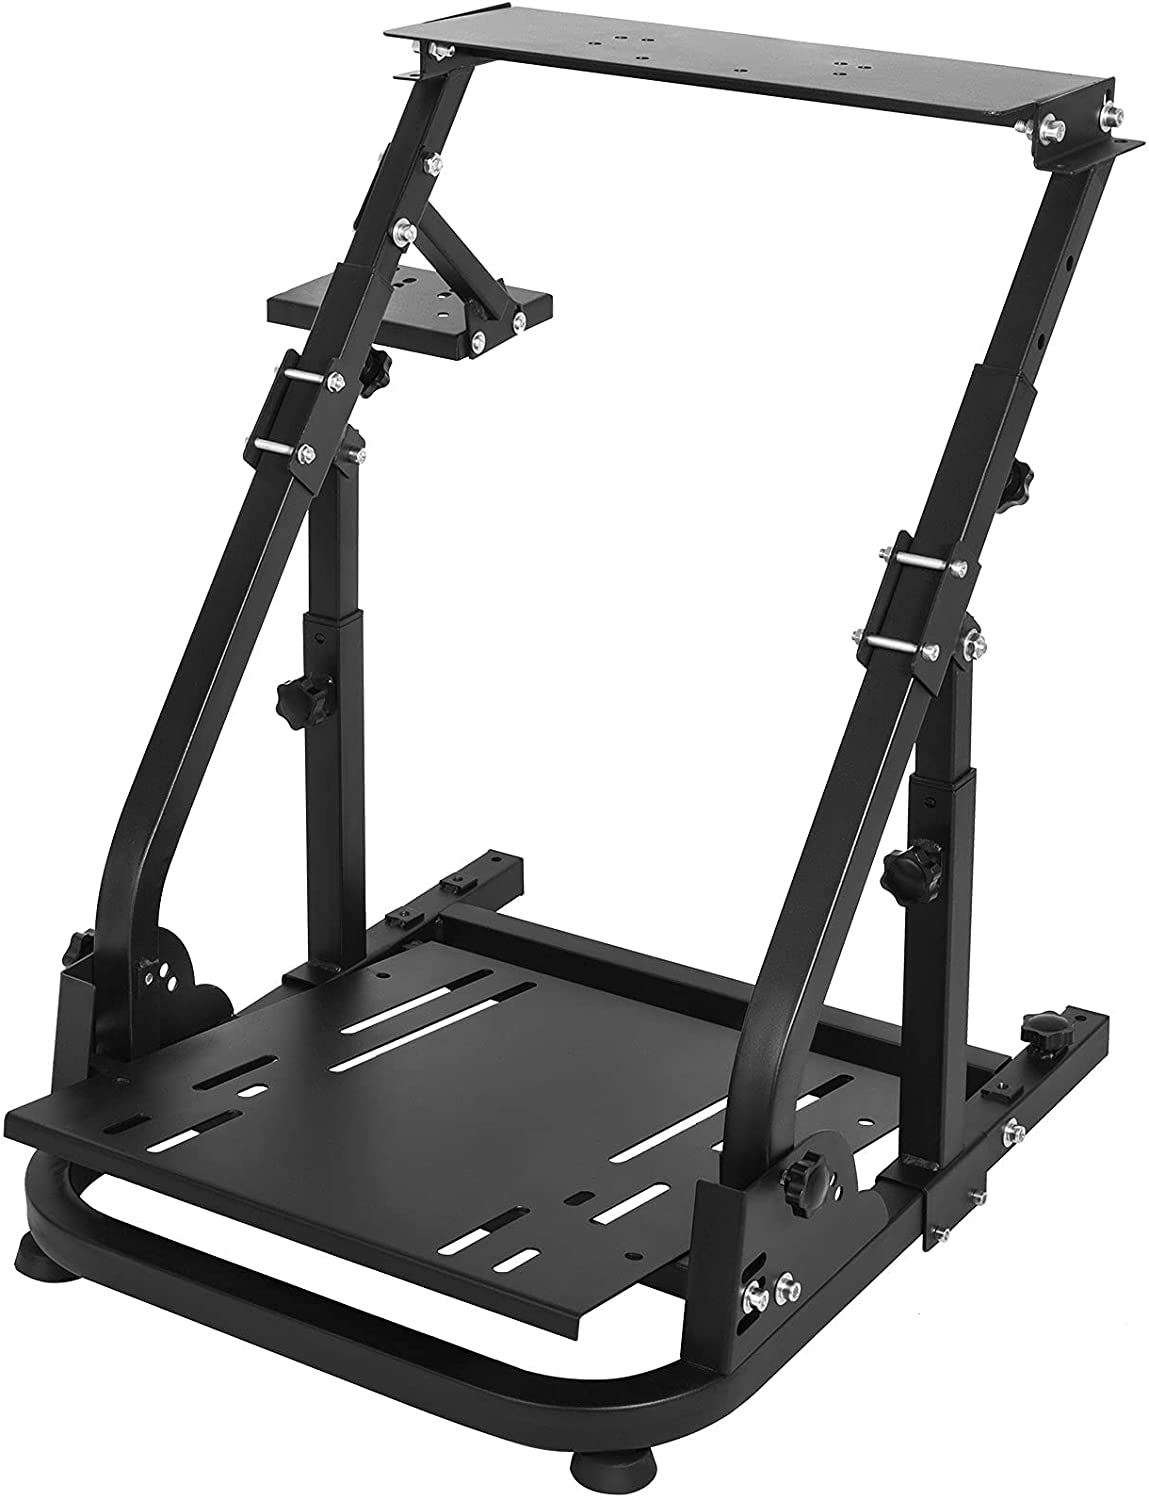 Minneer Stable Racing Wheel Stand with Double Support Arms Fit Logitech Moza R5